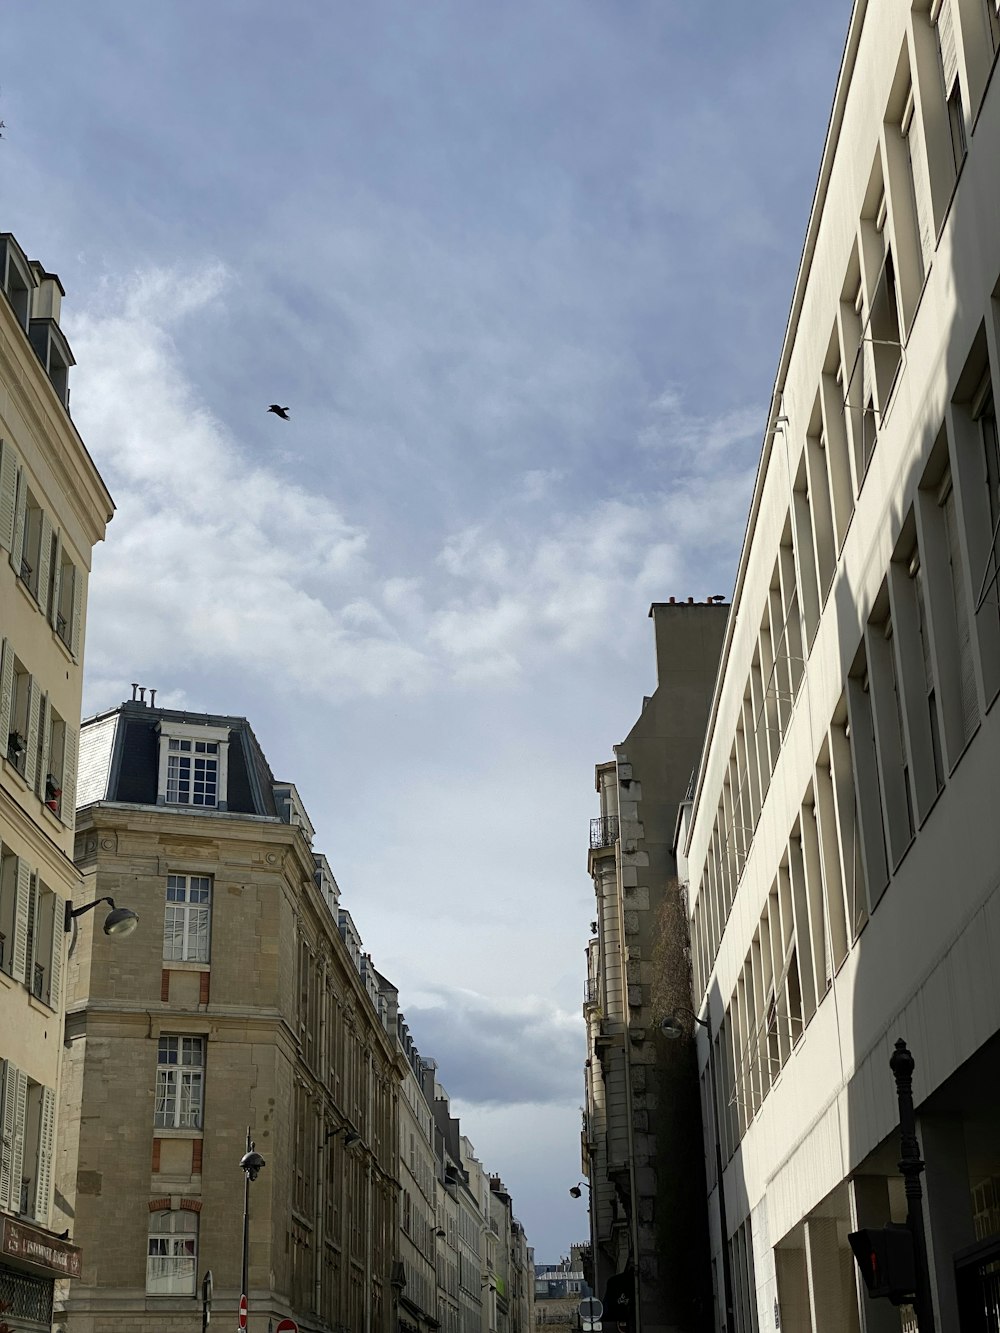 a bird flying over a street in a city